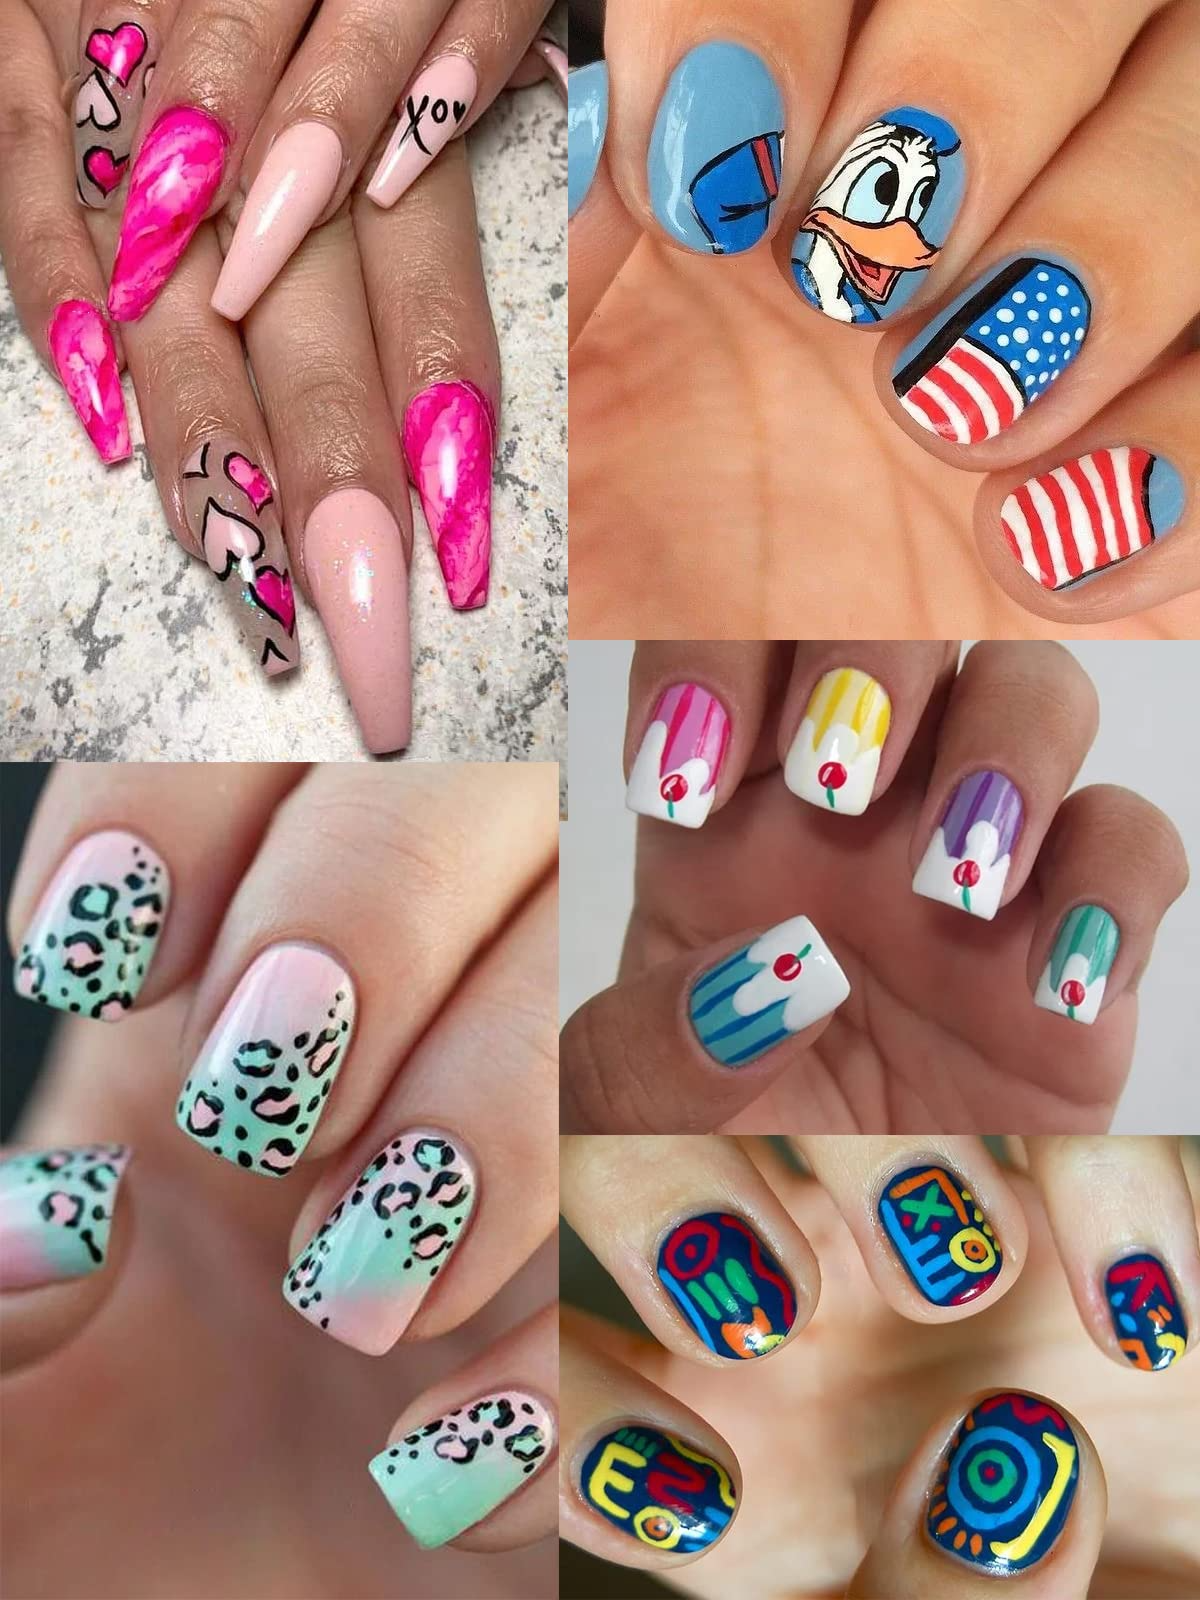 Follow the trend and create oil-painting nails.